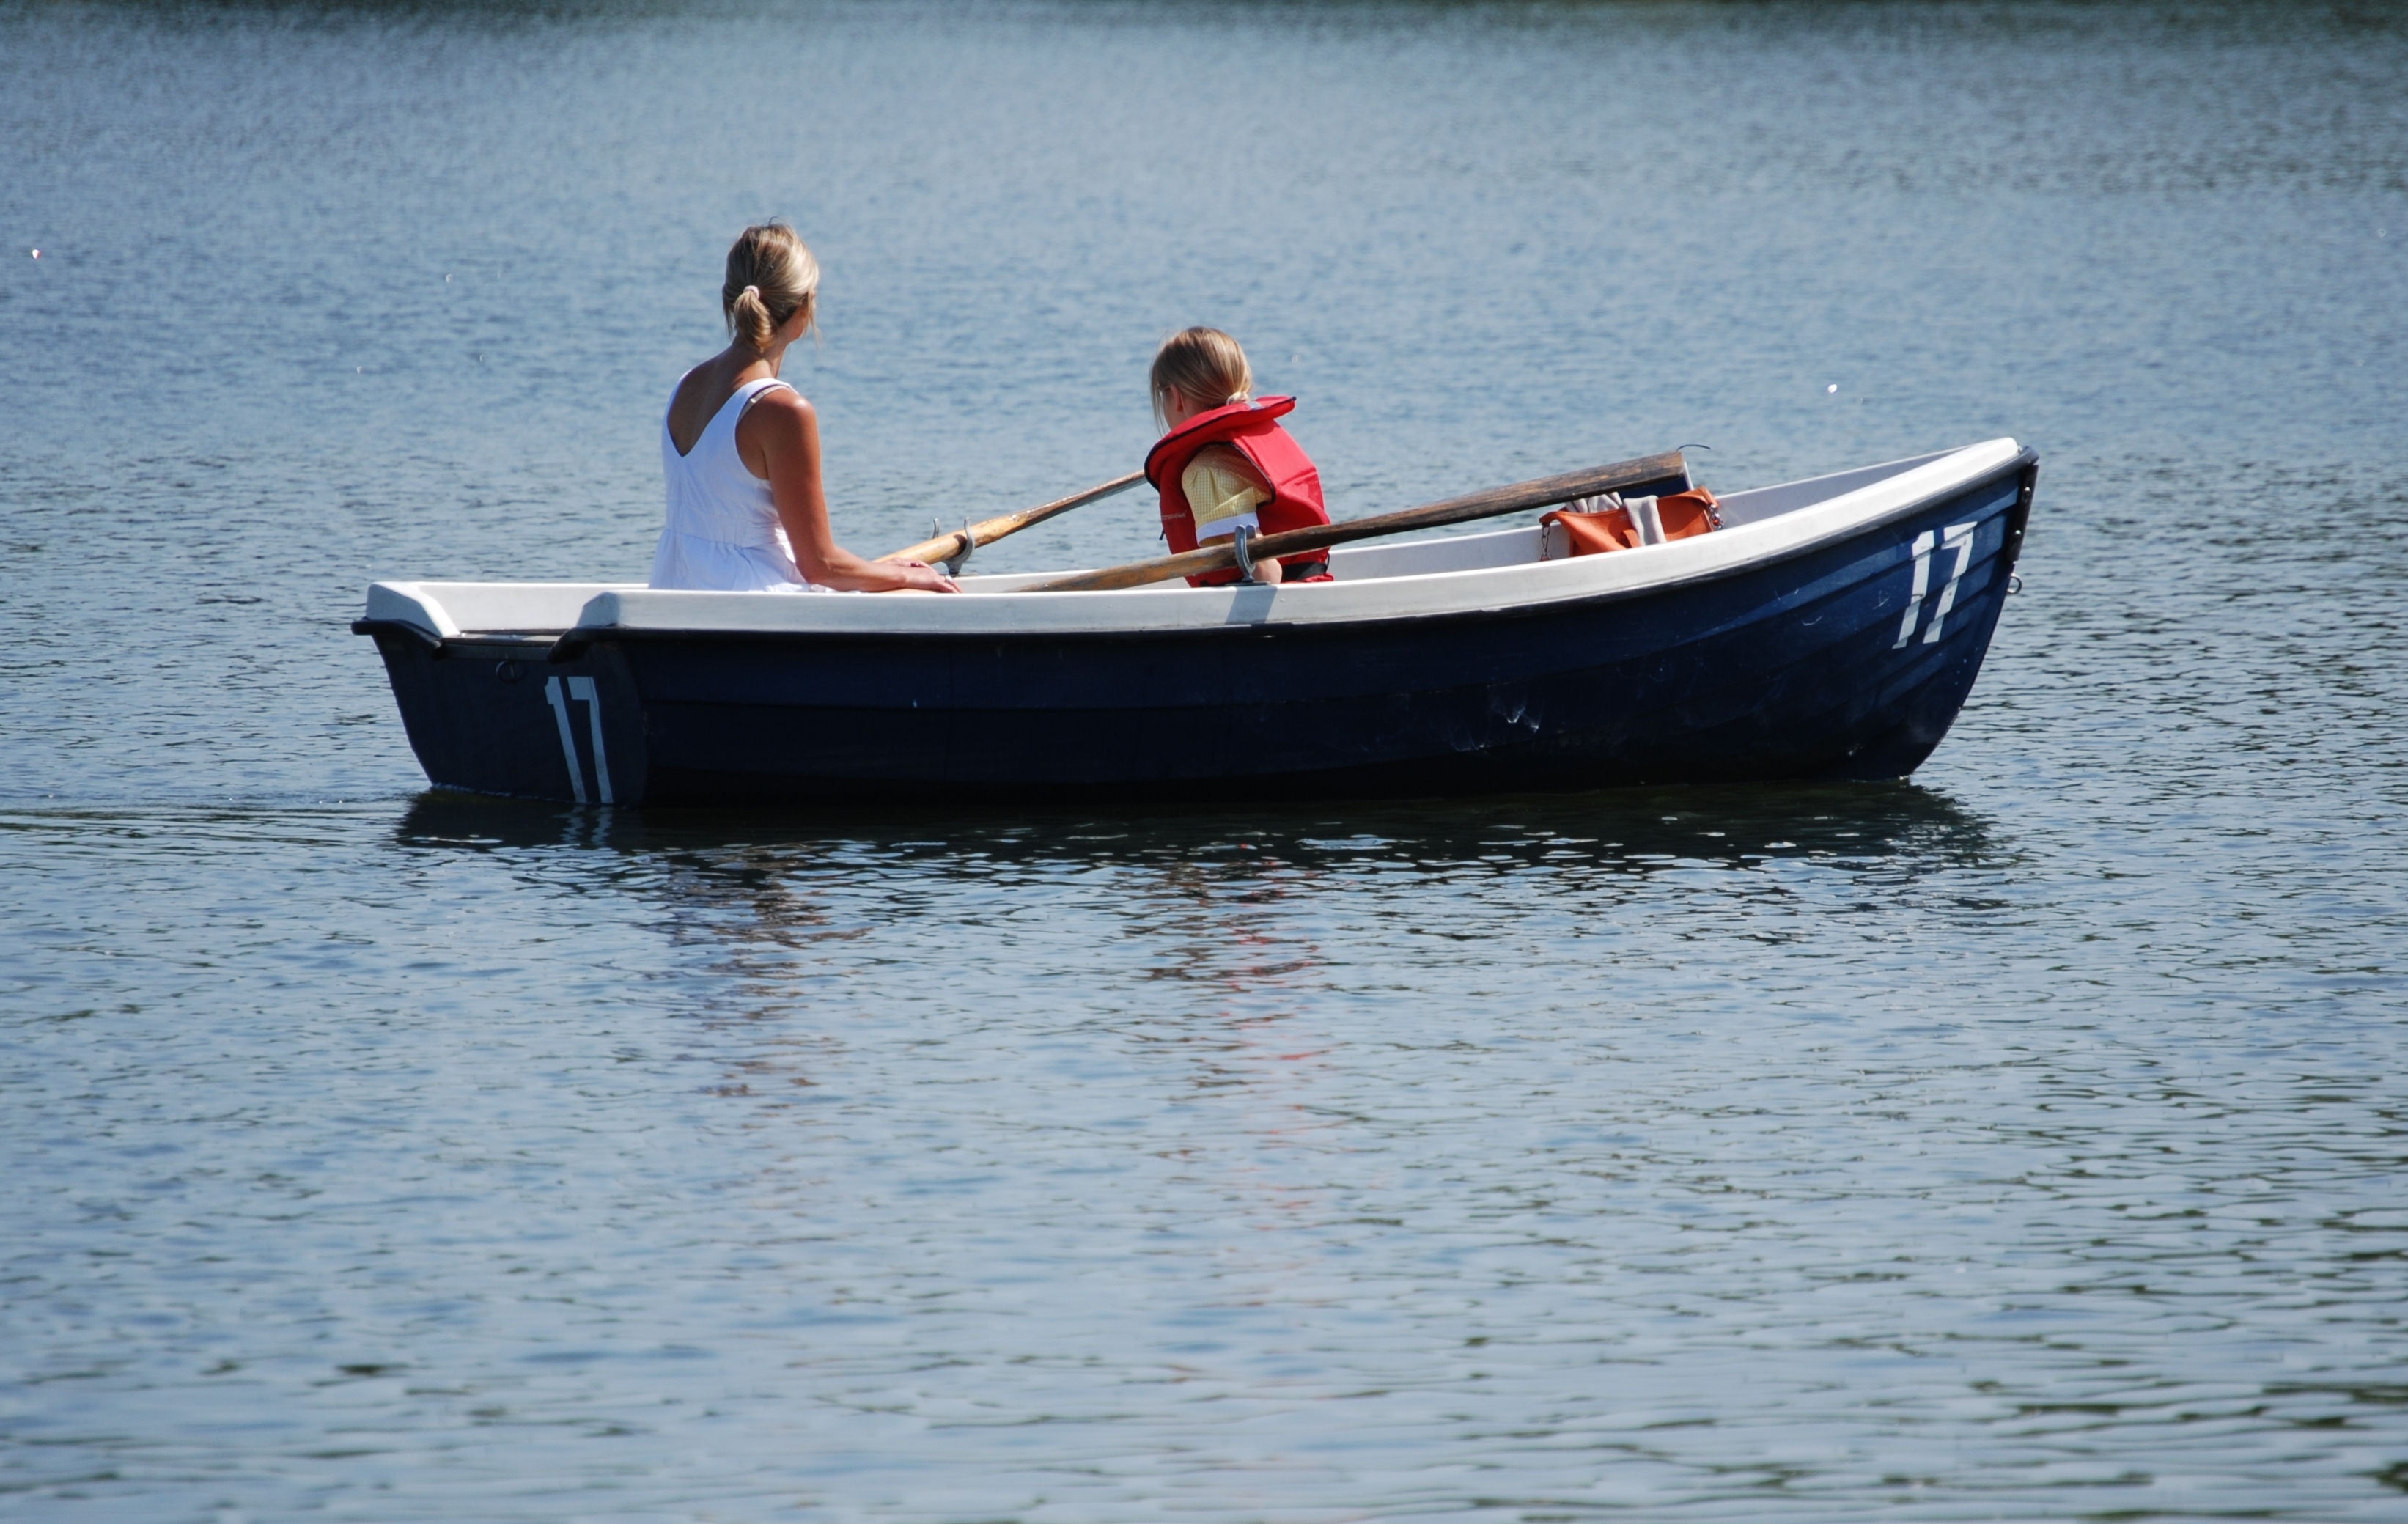 woman wearing white sleeveless shirt riding on blue and white boat